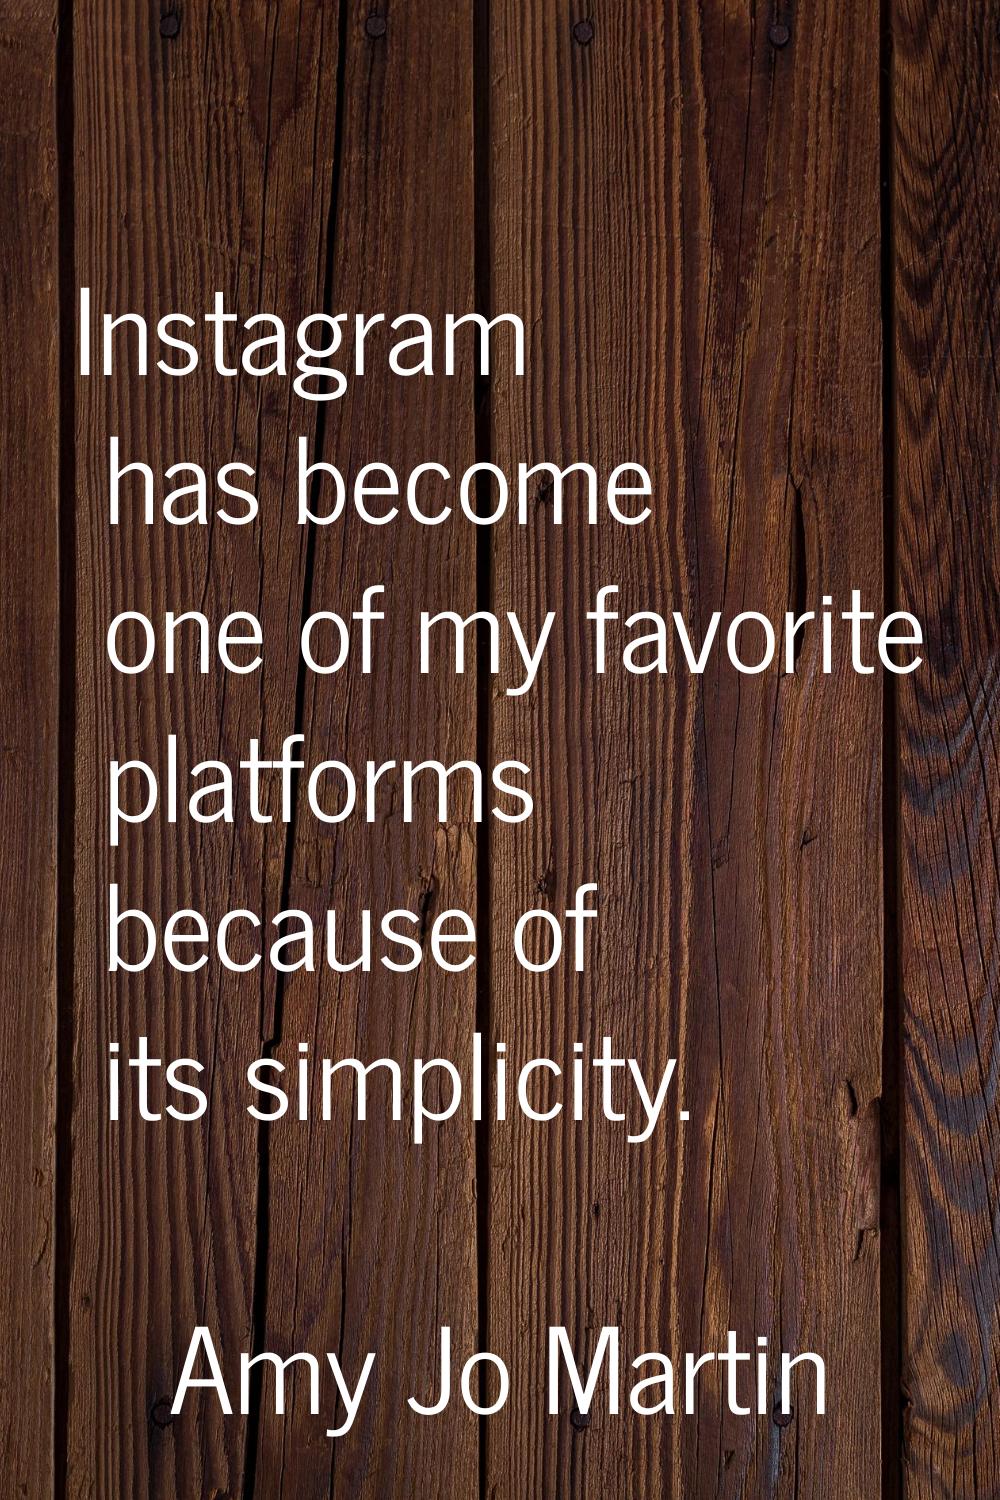 Instagram has become one of my favorite platforms because of its simplicity.